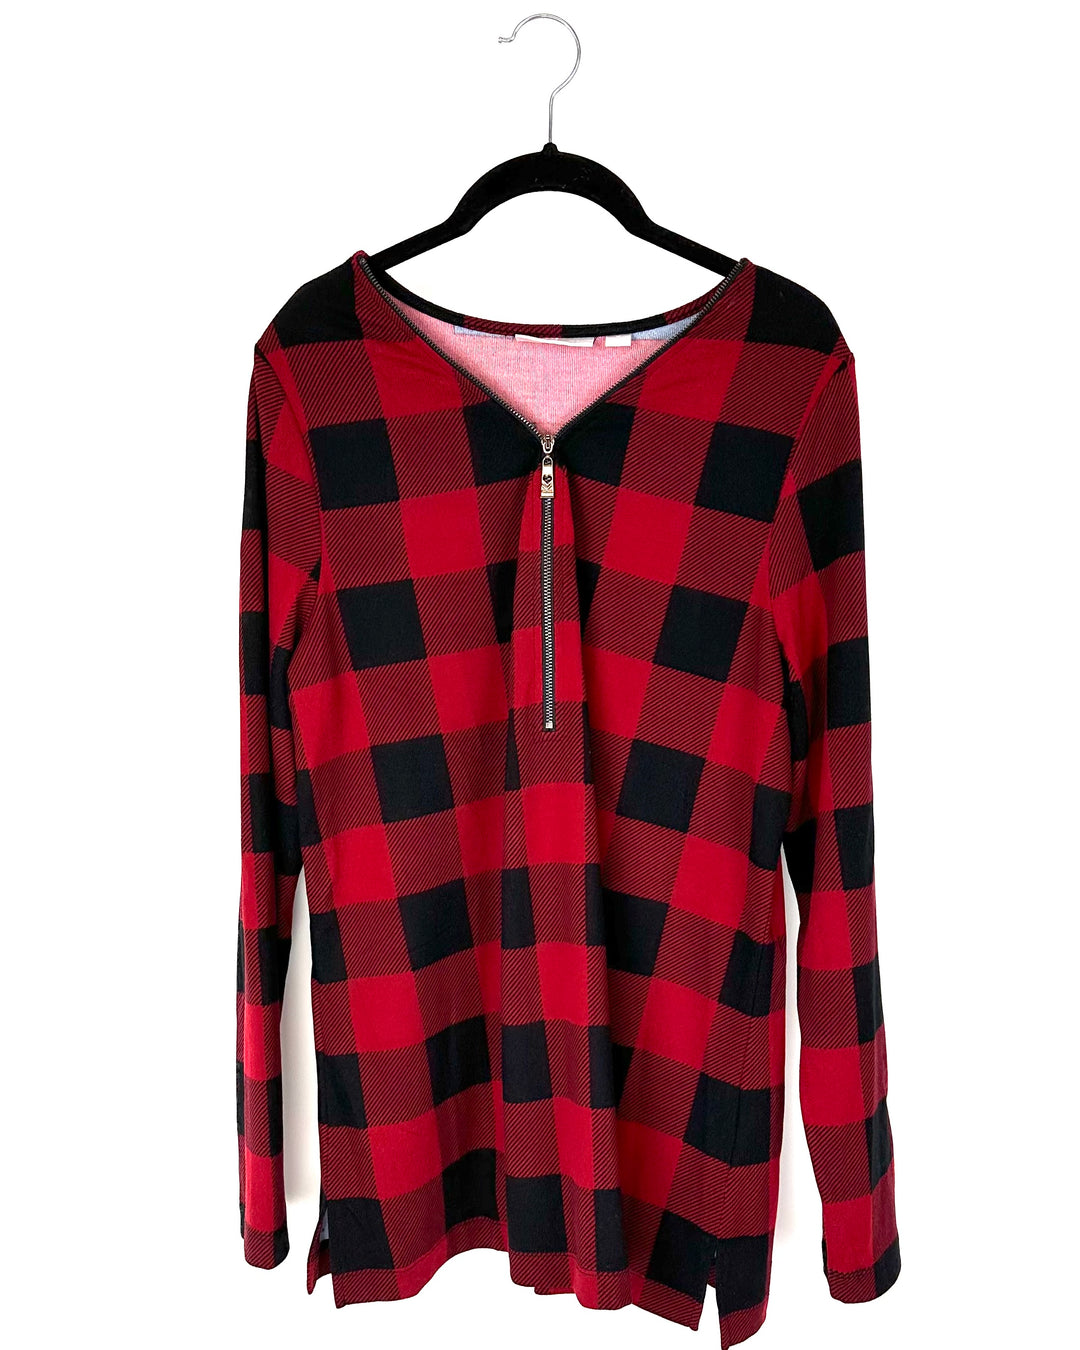 Black And Red Plaid Long Sleeve Top - Size 10-12